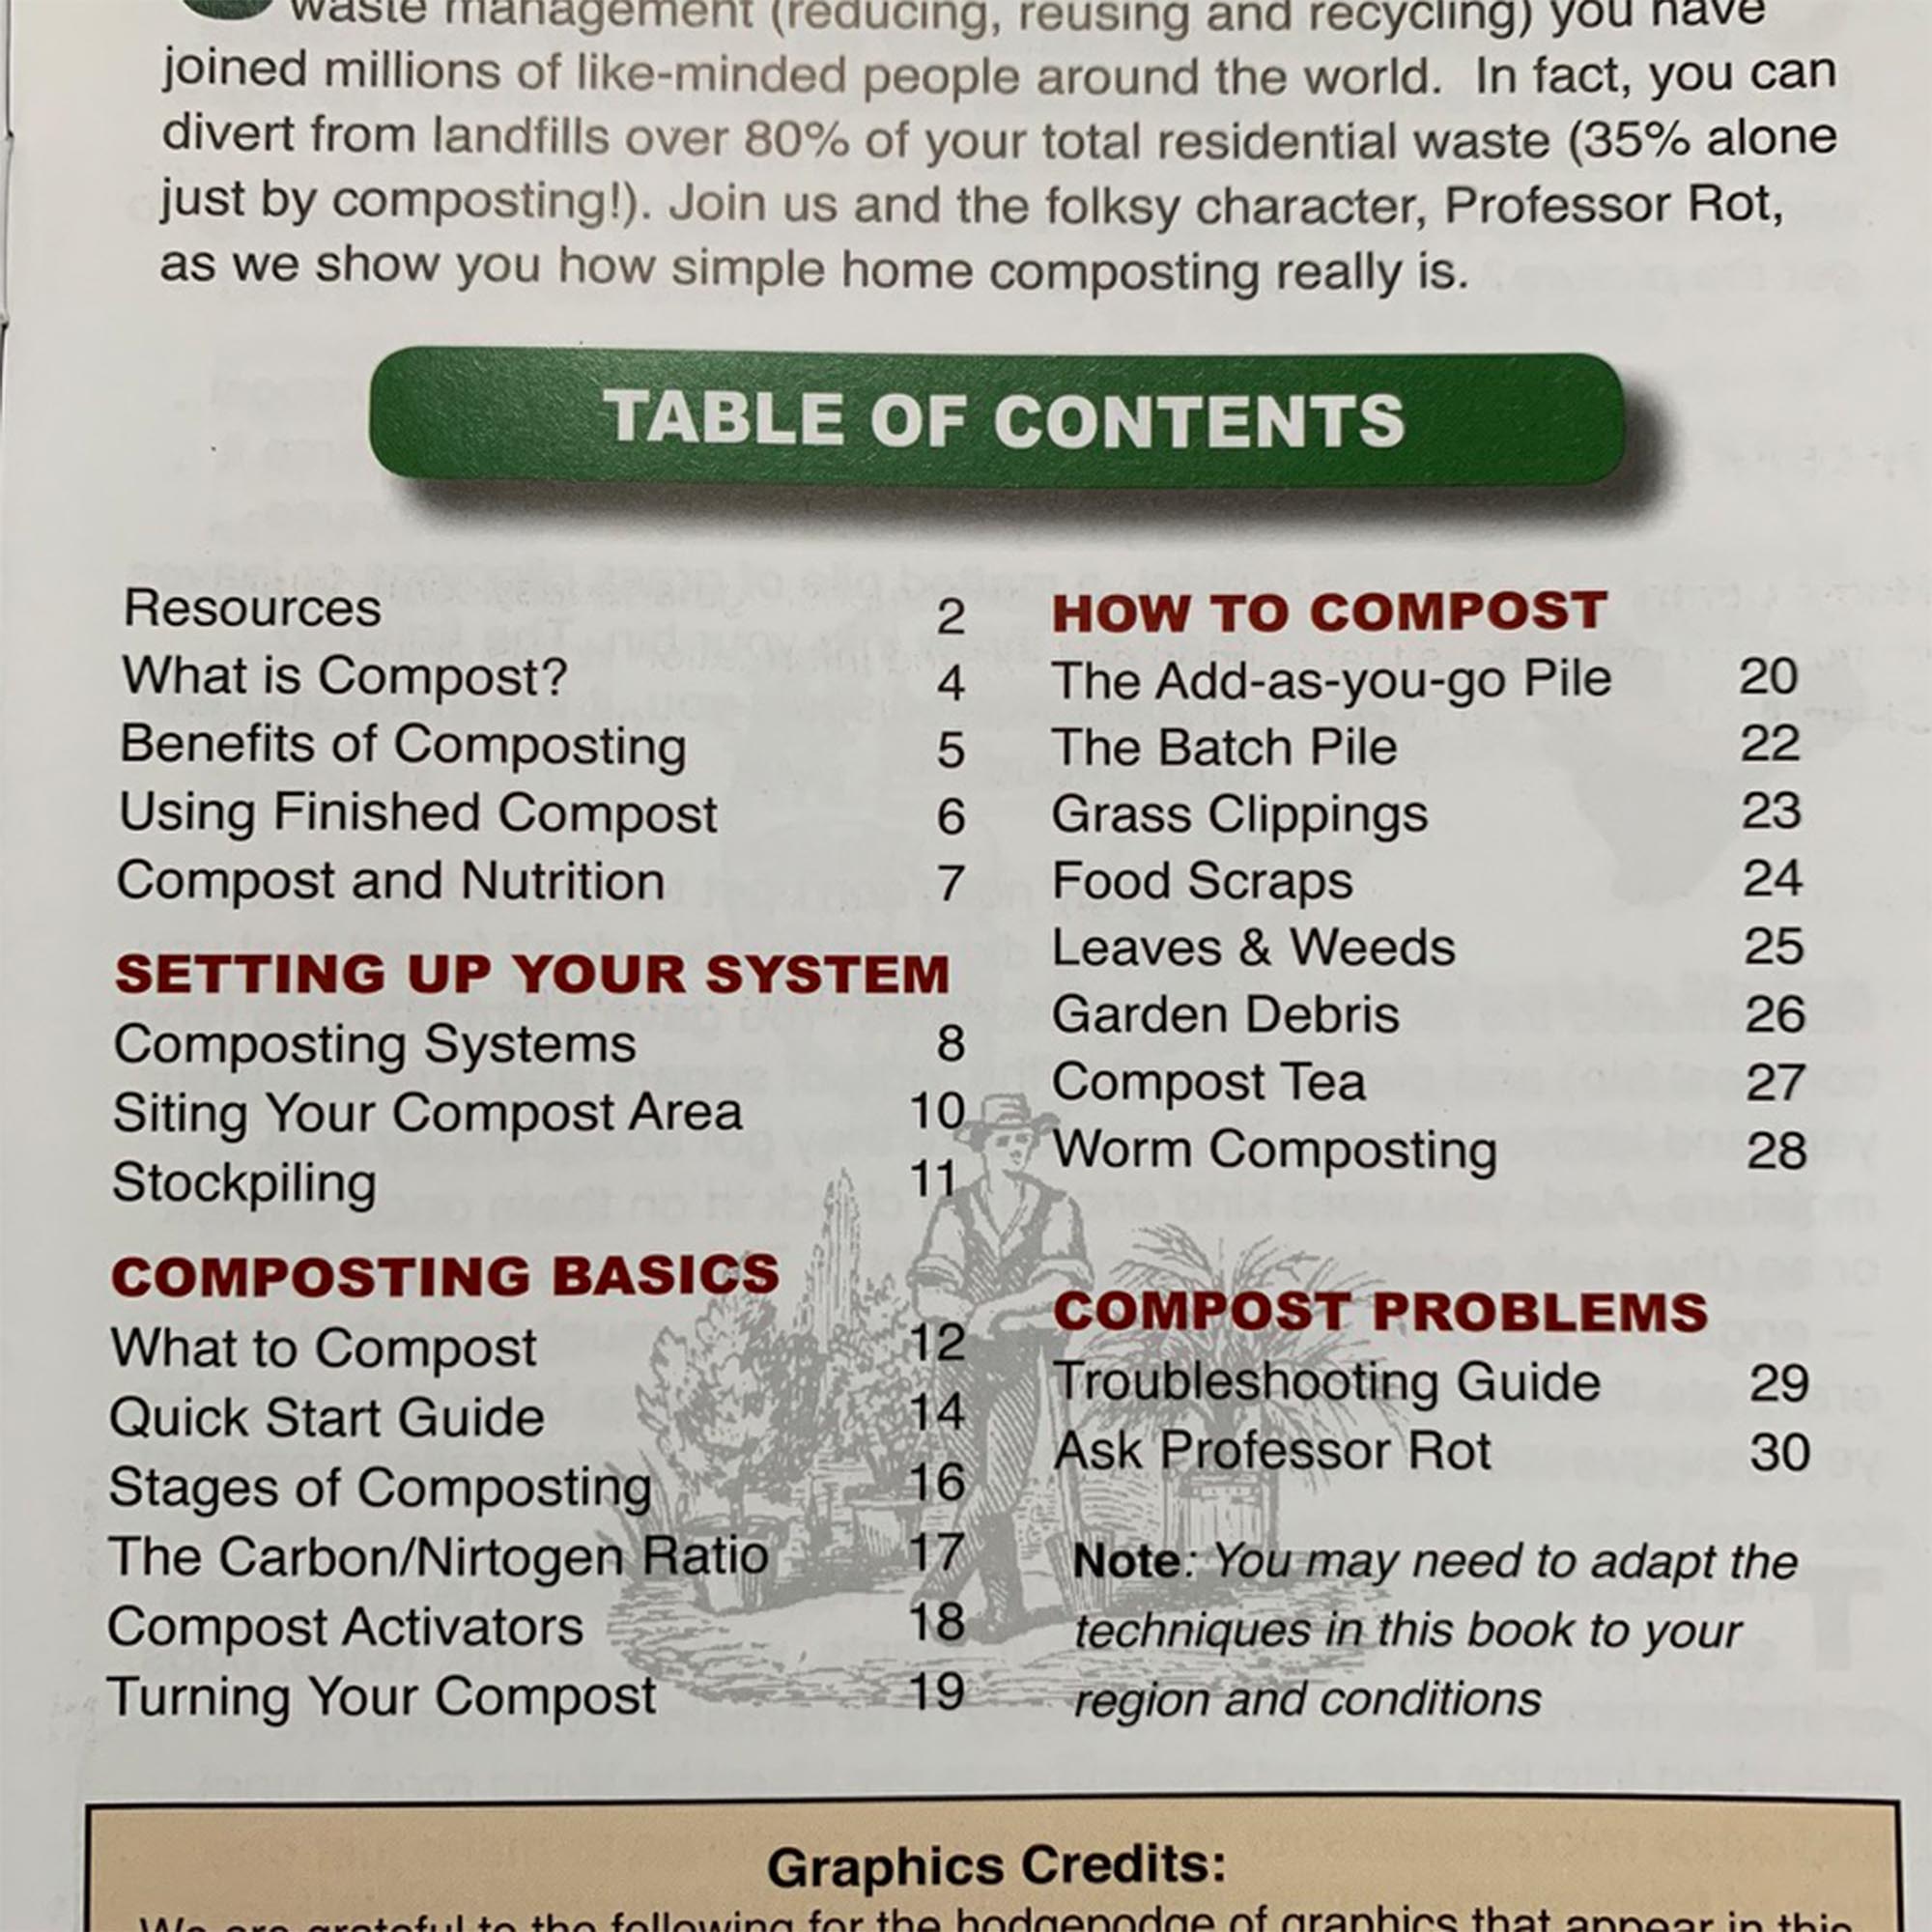 The worlds most popular compost guide, Home Composting made easy. By C.Forrest McDowell & Tricia Clark-McDowell Paperback 31 pages.